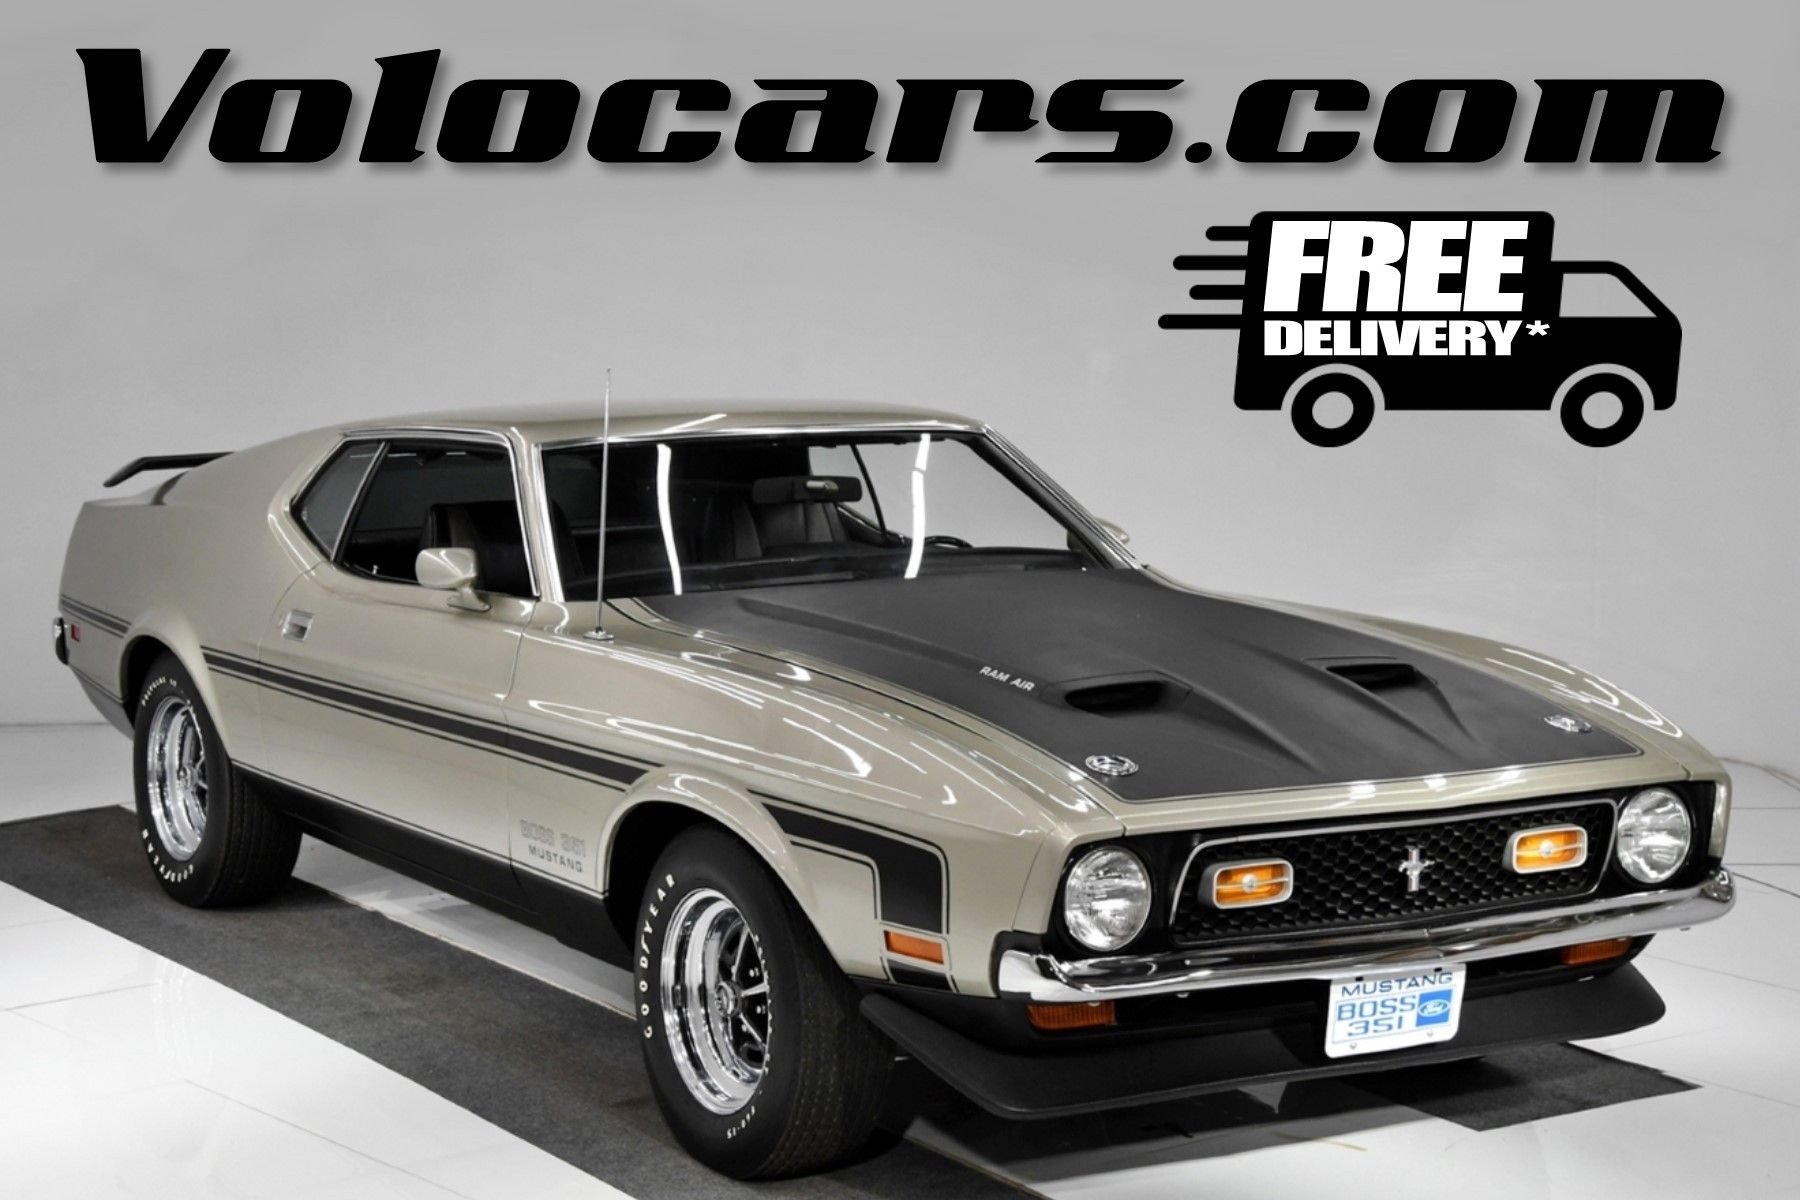 1971 Ford Mustang Boss 351 Wallpapers